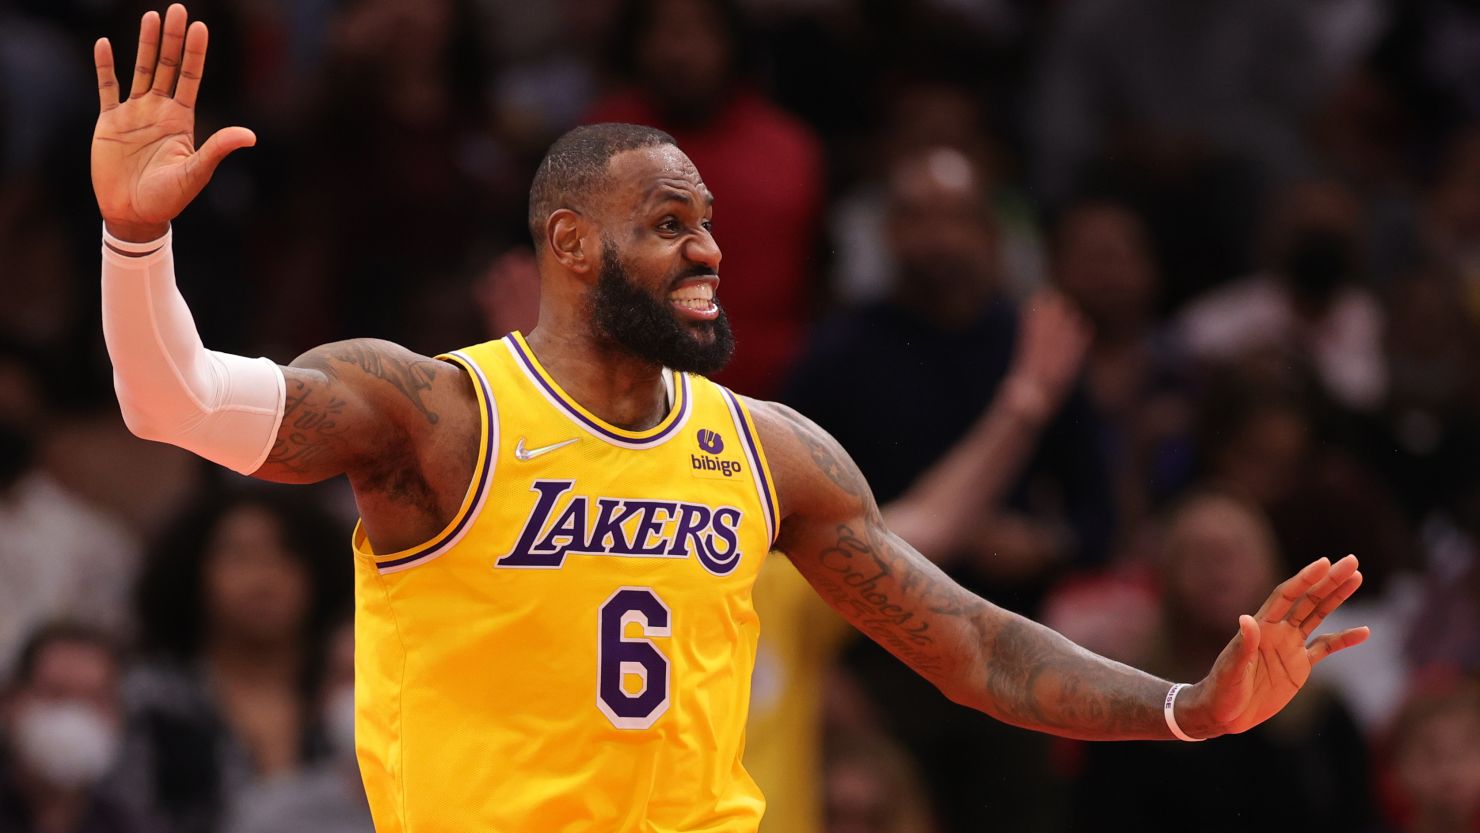 LeBron James reached 36,000 career points in the NBA as the LA Lakers beat the Houston Rockets.